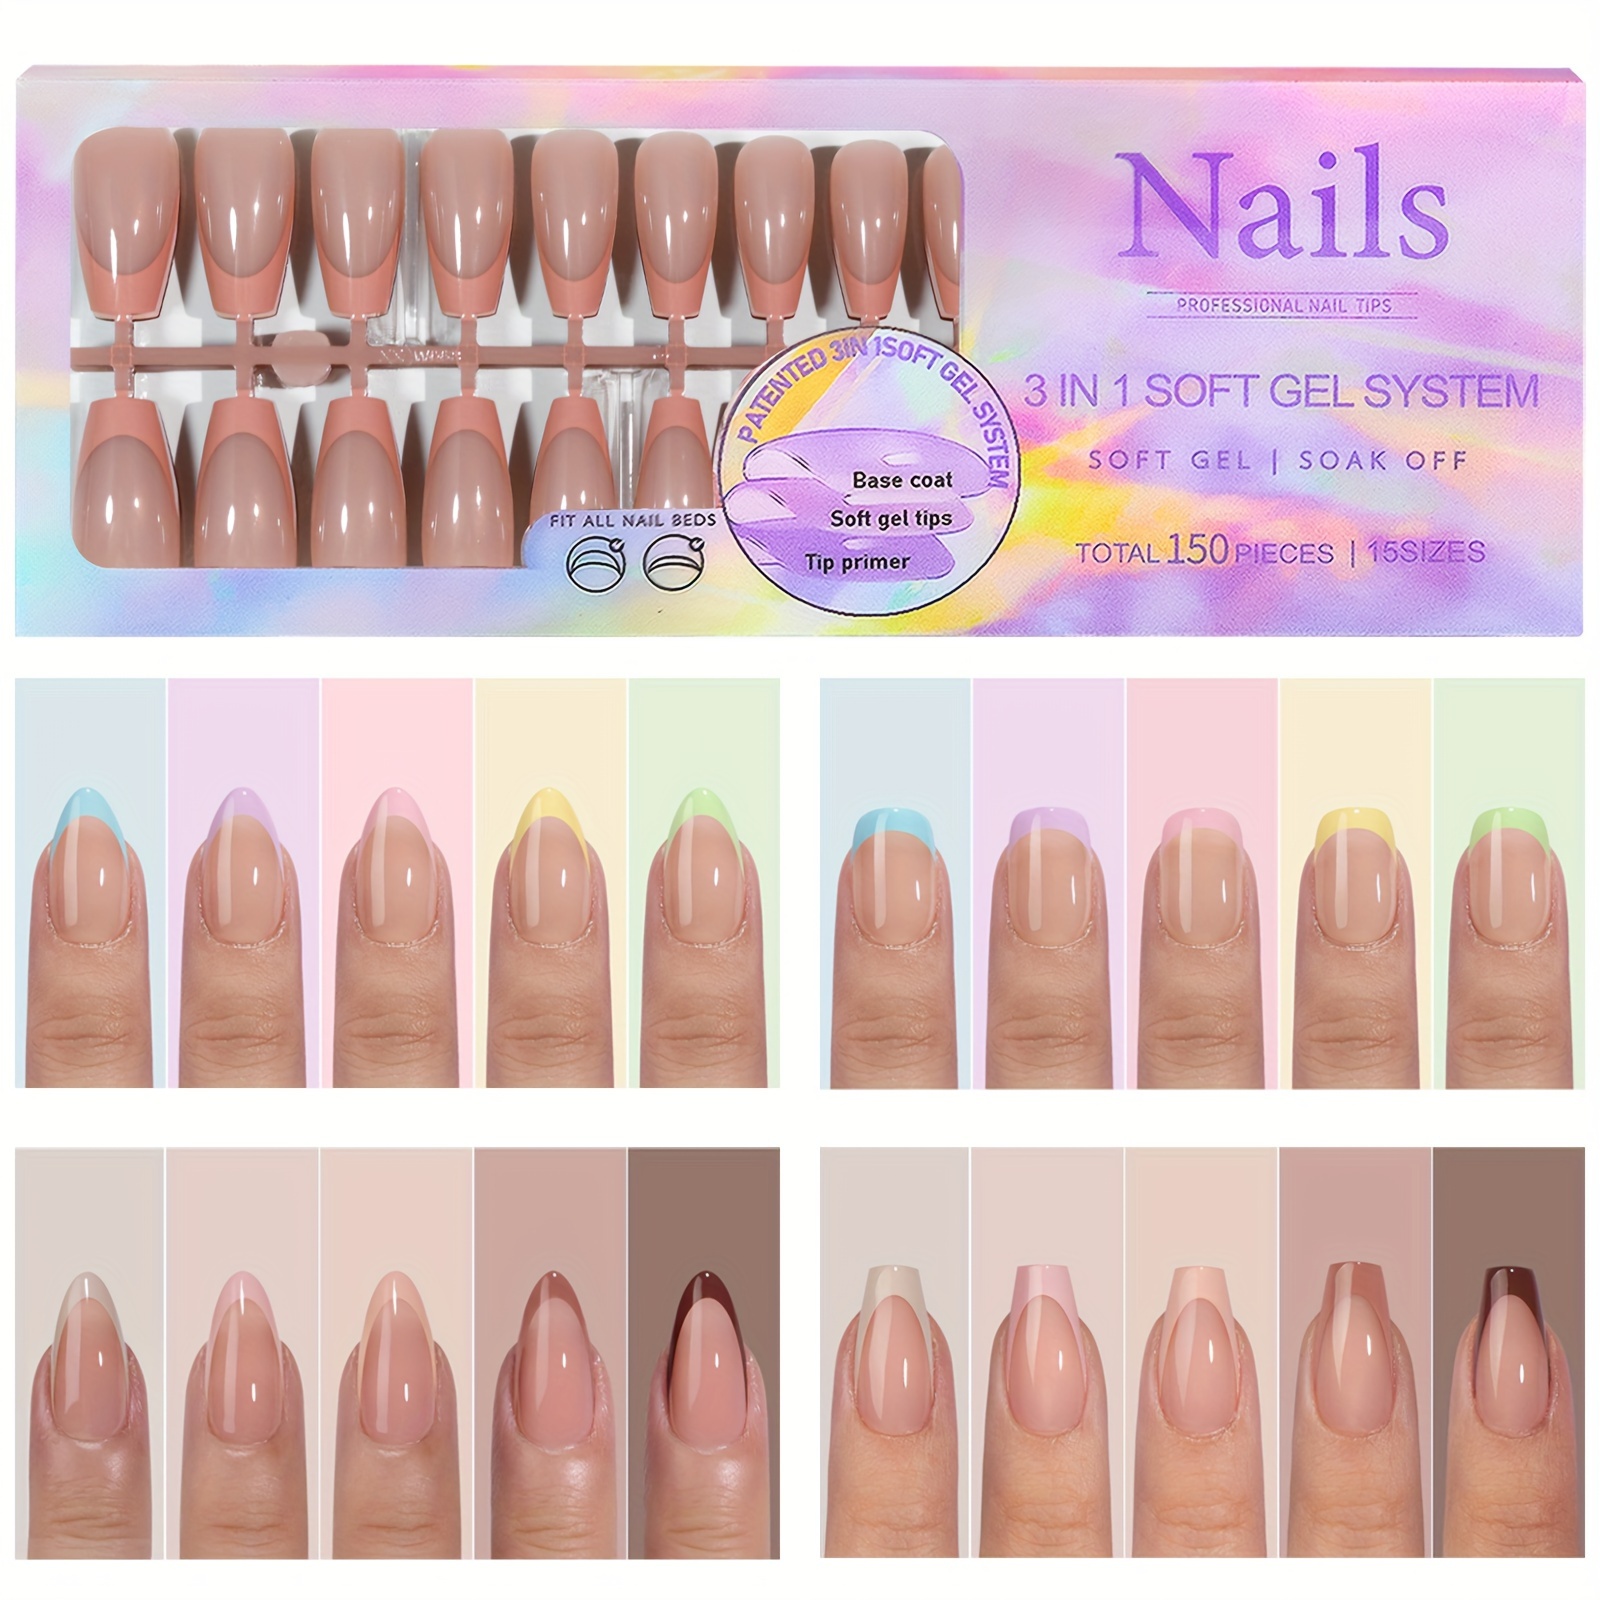 

150 Pieces, Soft Gel Nail Tips Set, 15 Sizes, French Nail Tips, Pre Applied Tip Primer, Quicker Application, Neutral & Nude Skin Tones, Removable Nail Art Press On Fake Nail Tips For Easier Manicure